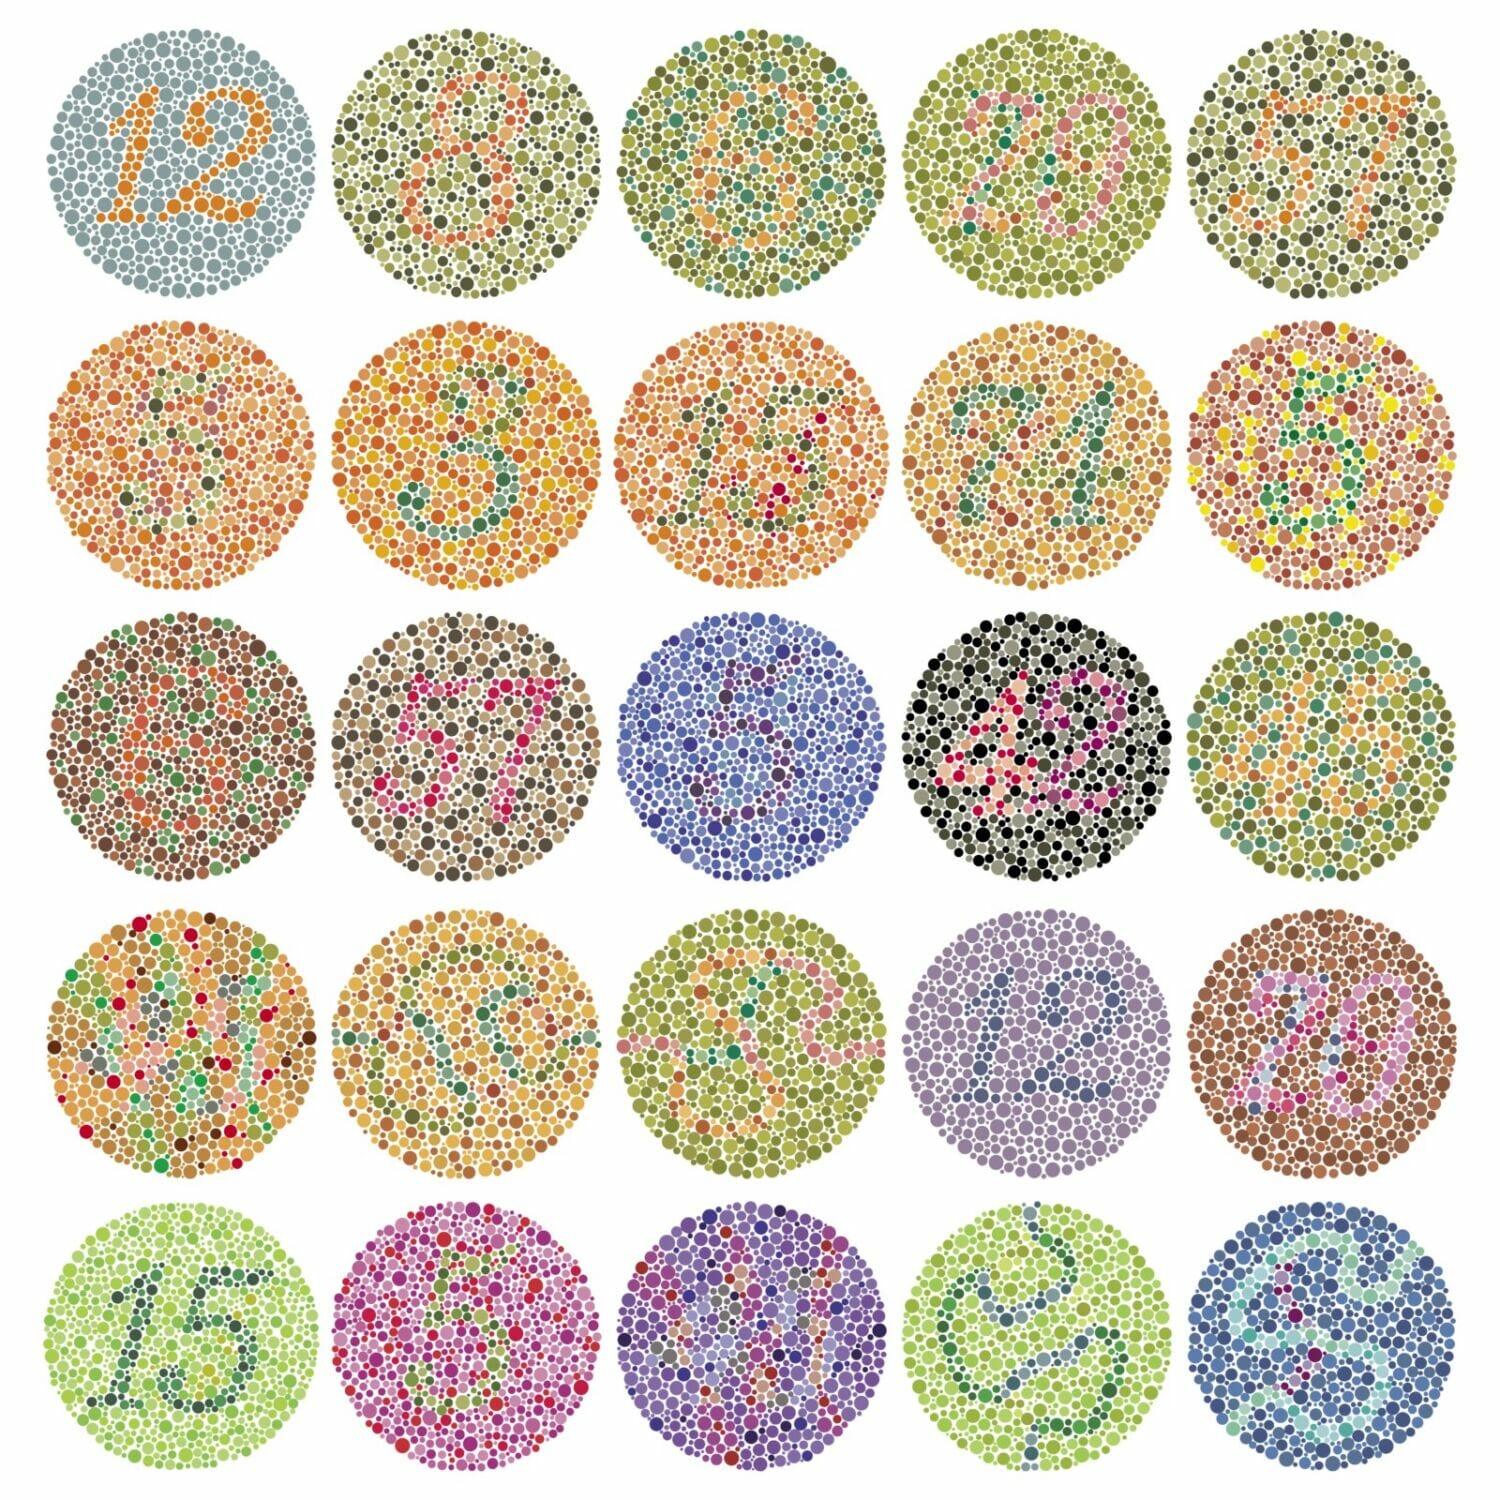 Ishihara Eye Test Charts For Color Blindness